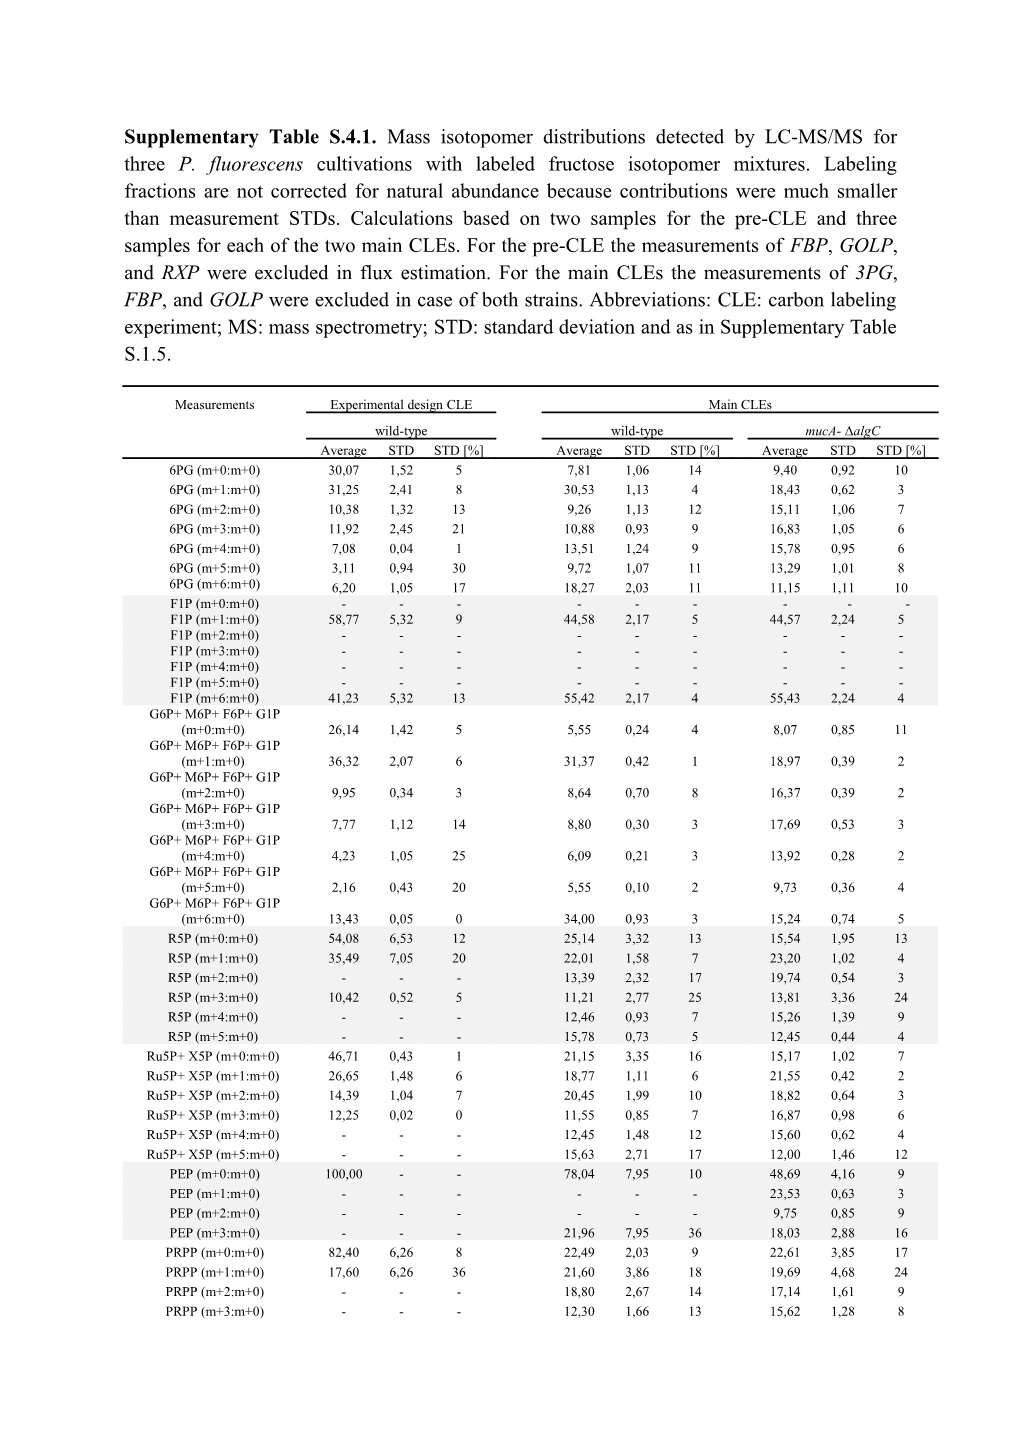 Supplementary Table S.4.1. Mass Isotopomer Distributions Detected by LC-MS/MS for Three